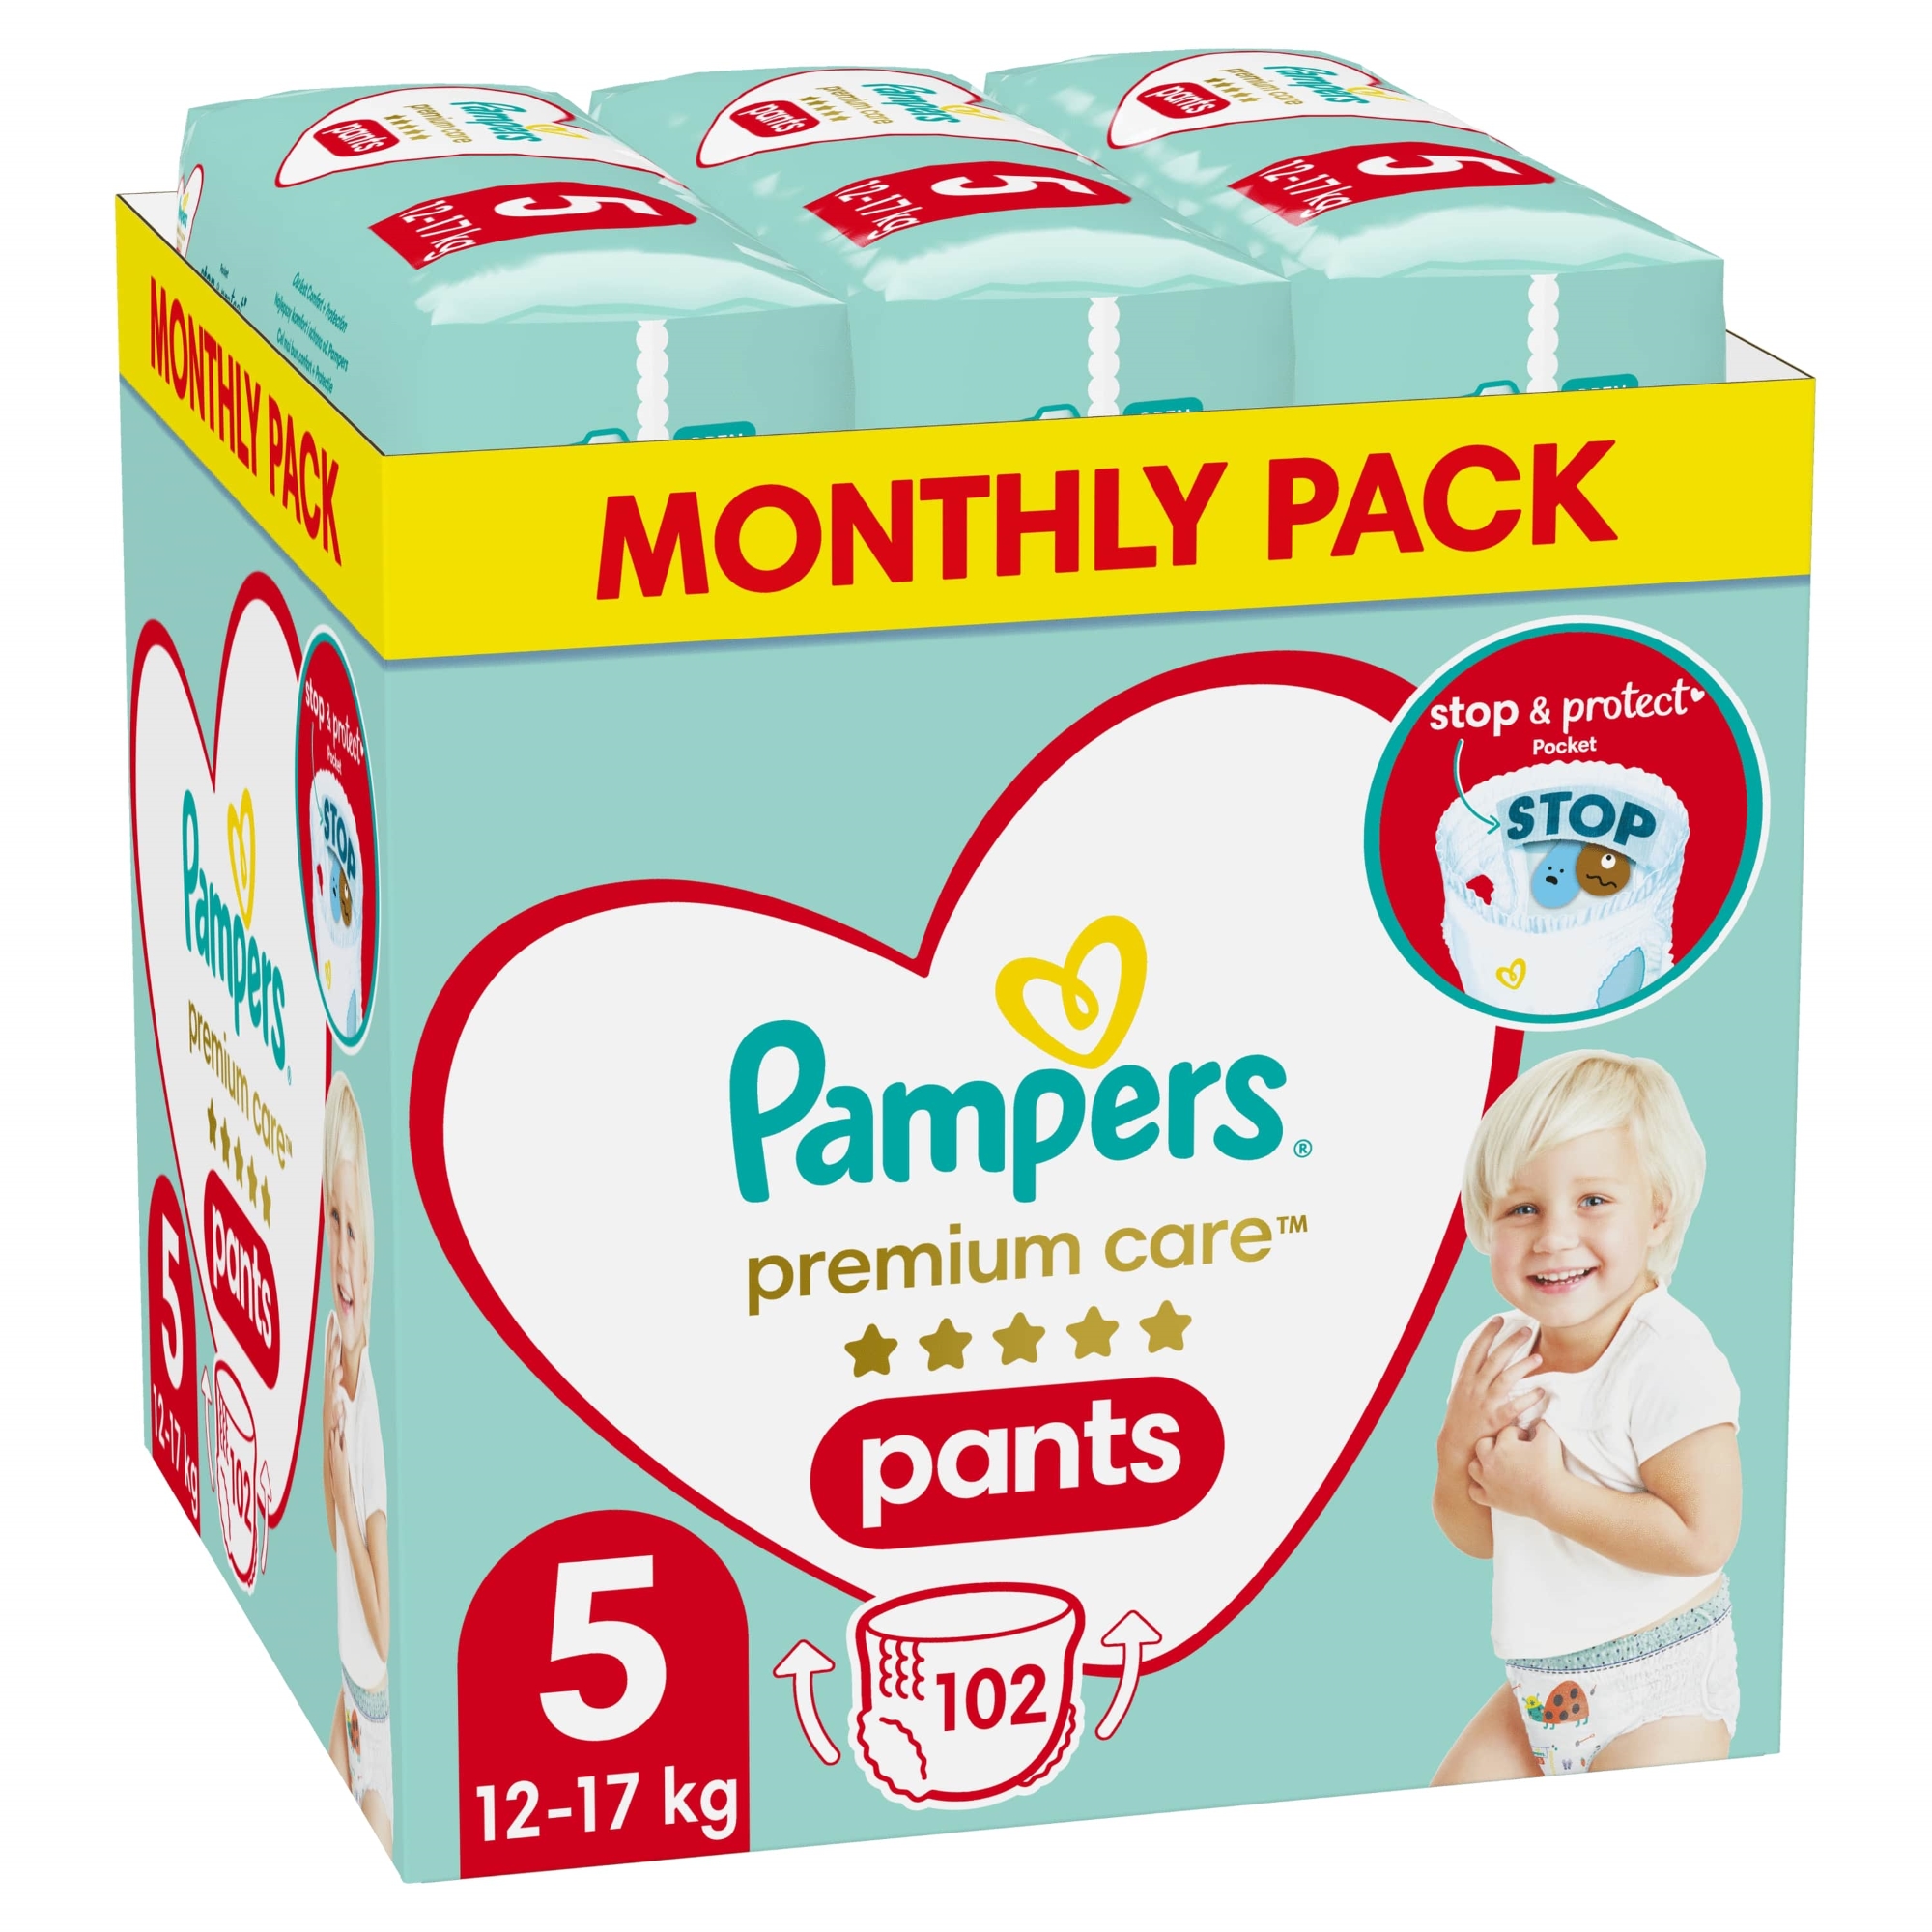 Personification liner fellowship Pampers Premium 5 Pants | funpennsylvania.com